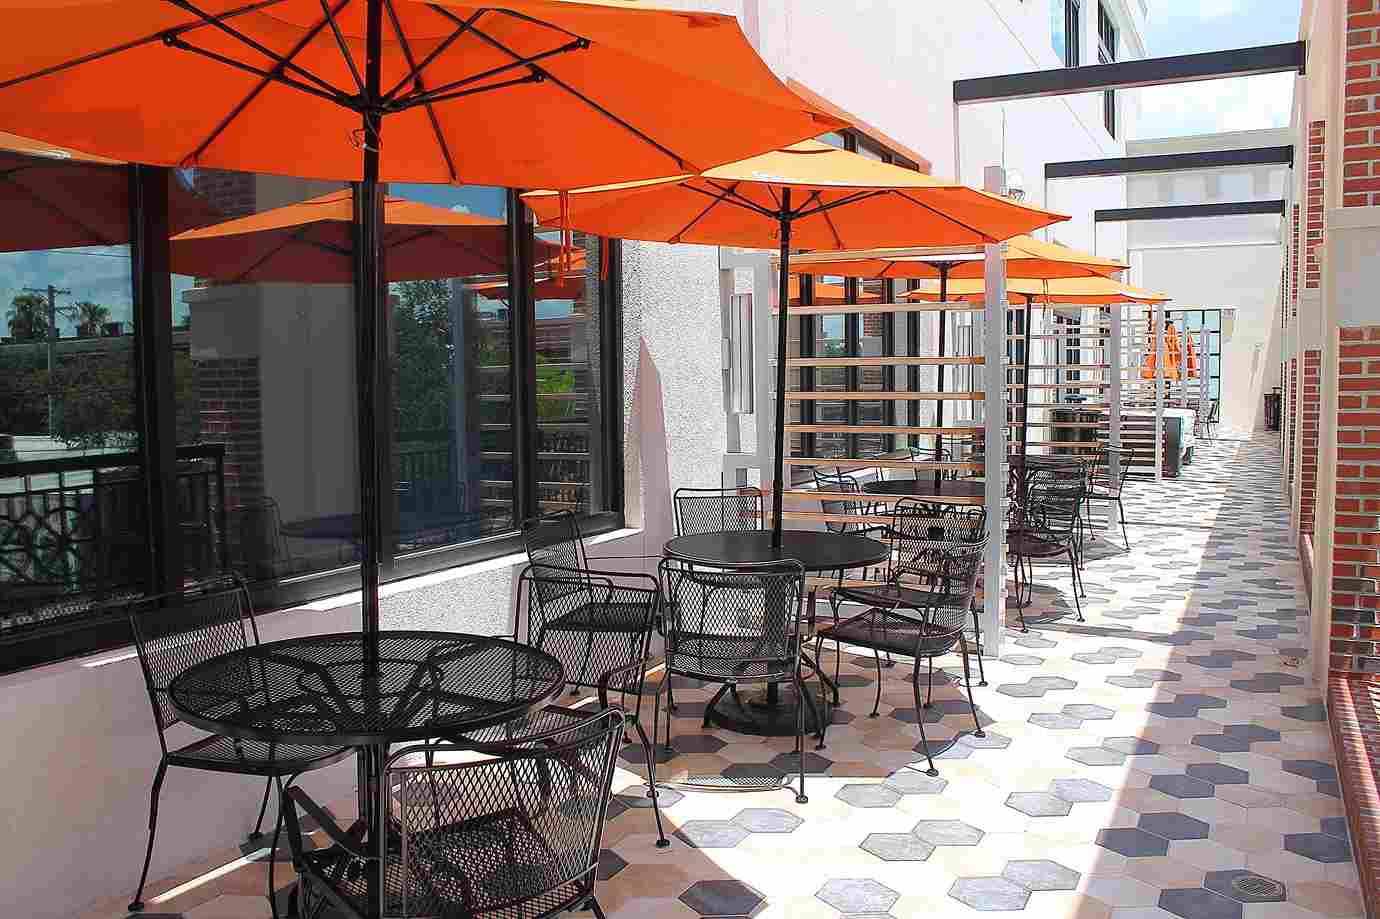 Balcony With Tables And Chairs And Orange Umbrella - Rof Inc